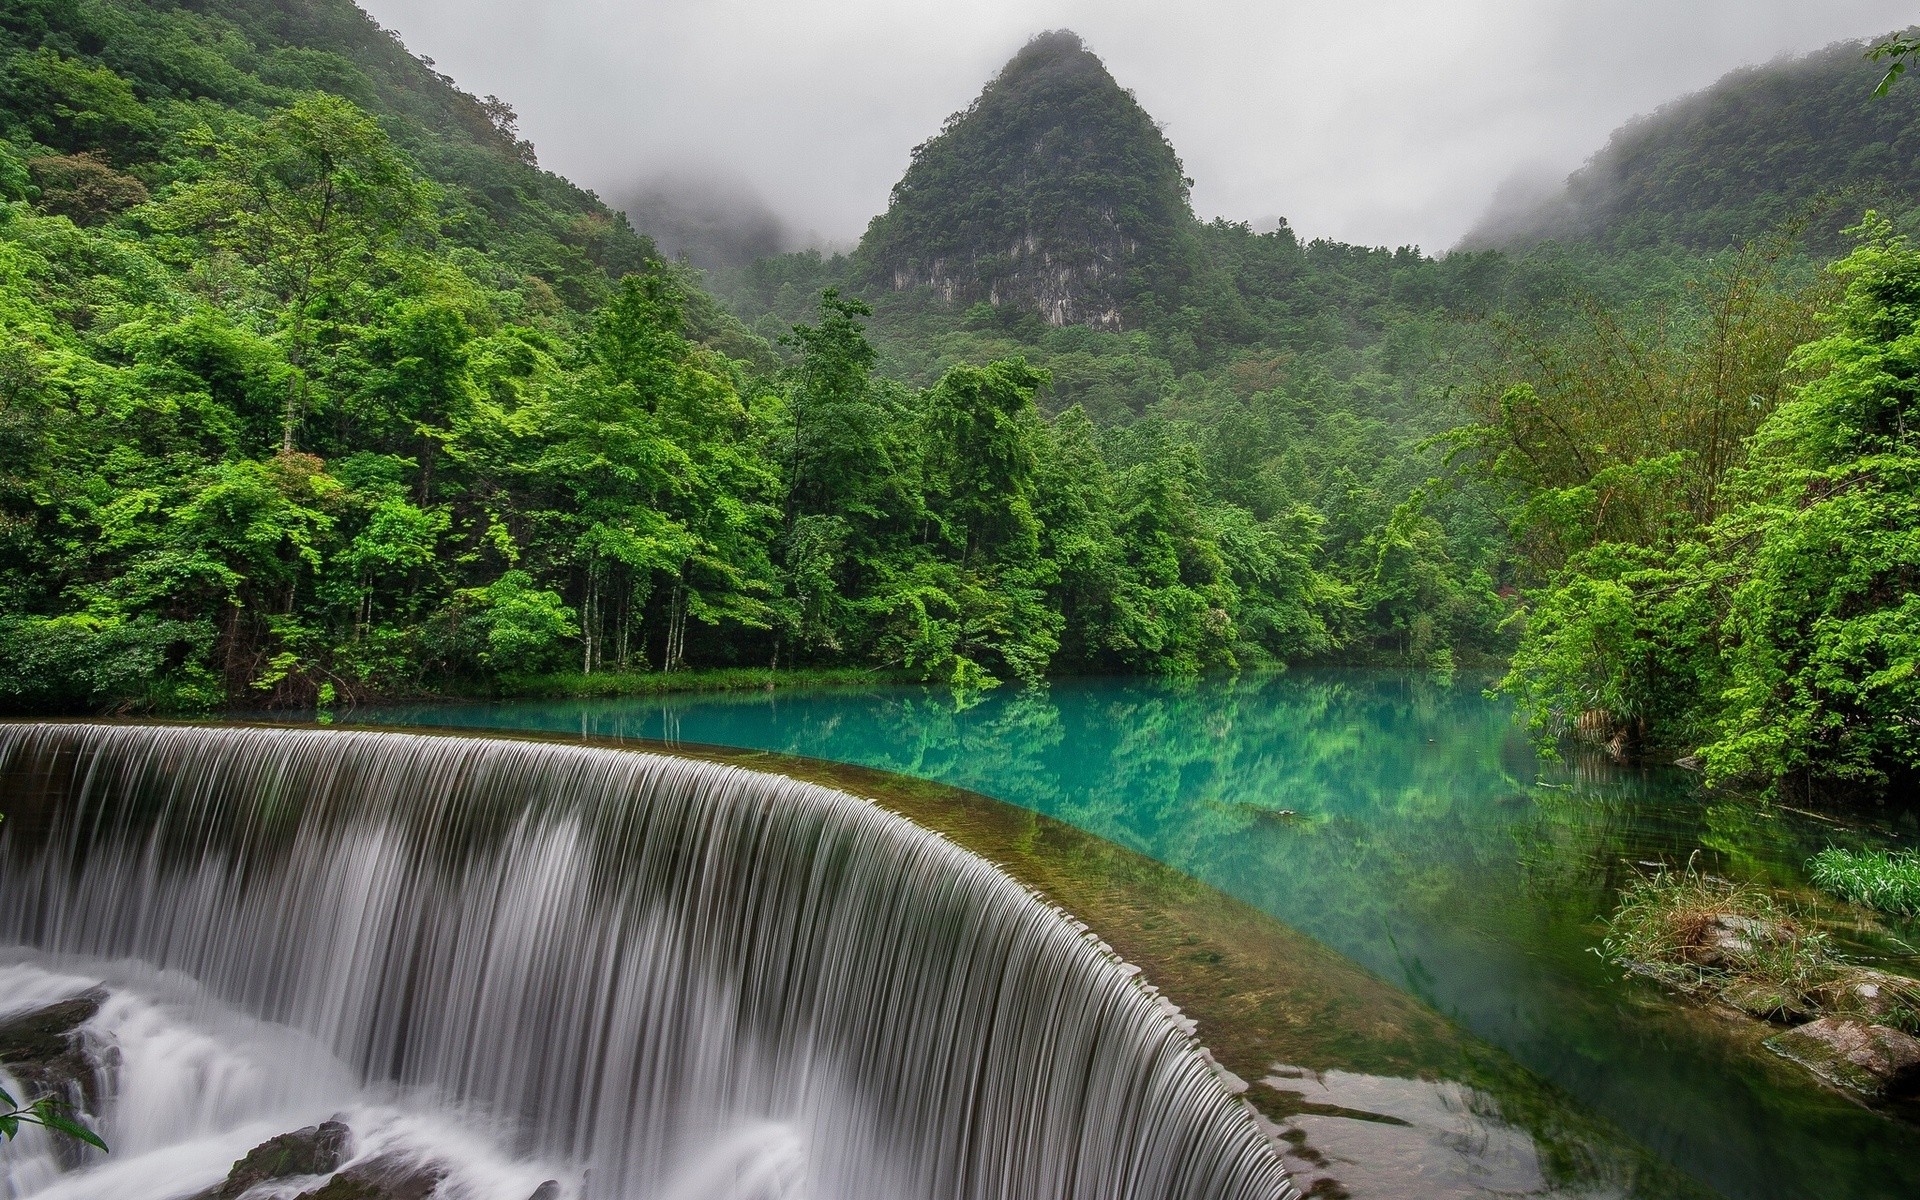 General 1920x1200 nature landscape trees forest China lake waterfall stones mountains mist jungle long exposure reflection Asia